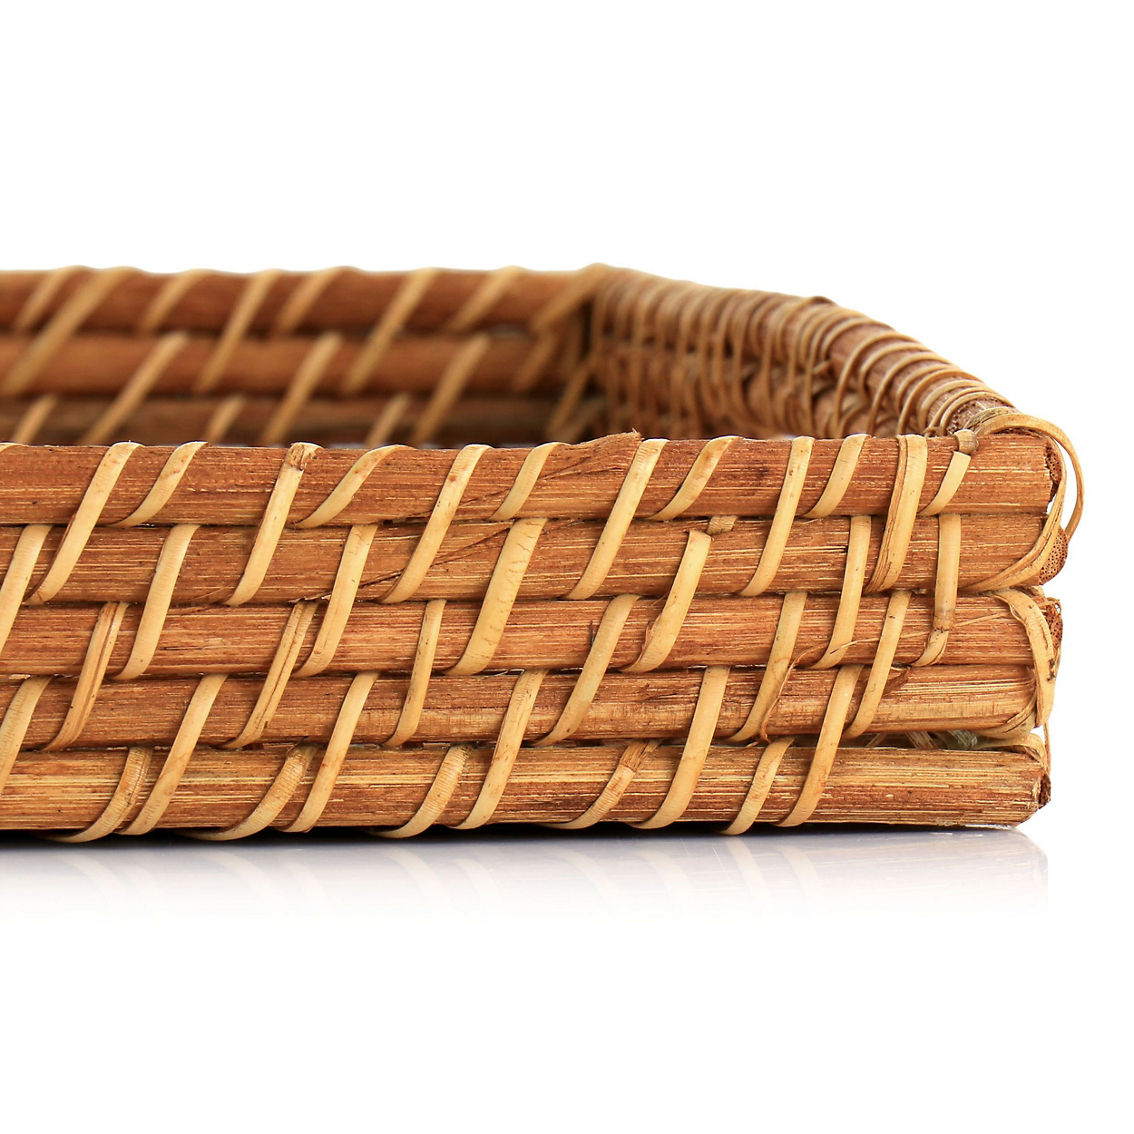 Martha Stewart 16 Inch Rattan Woven Serving Tray in Brown - Image 5 of 5